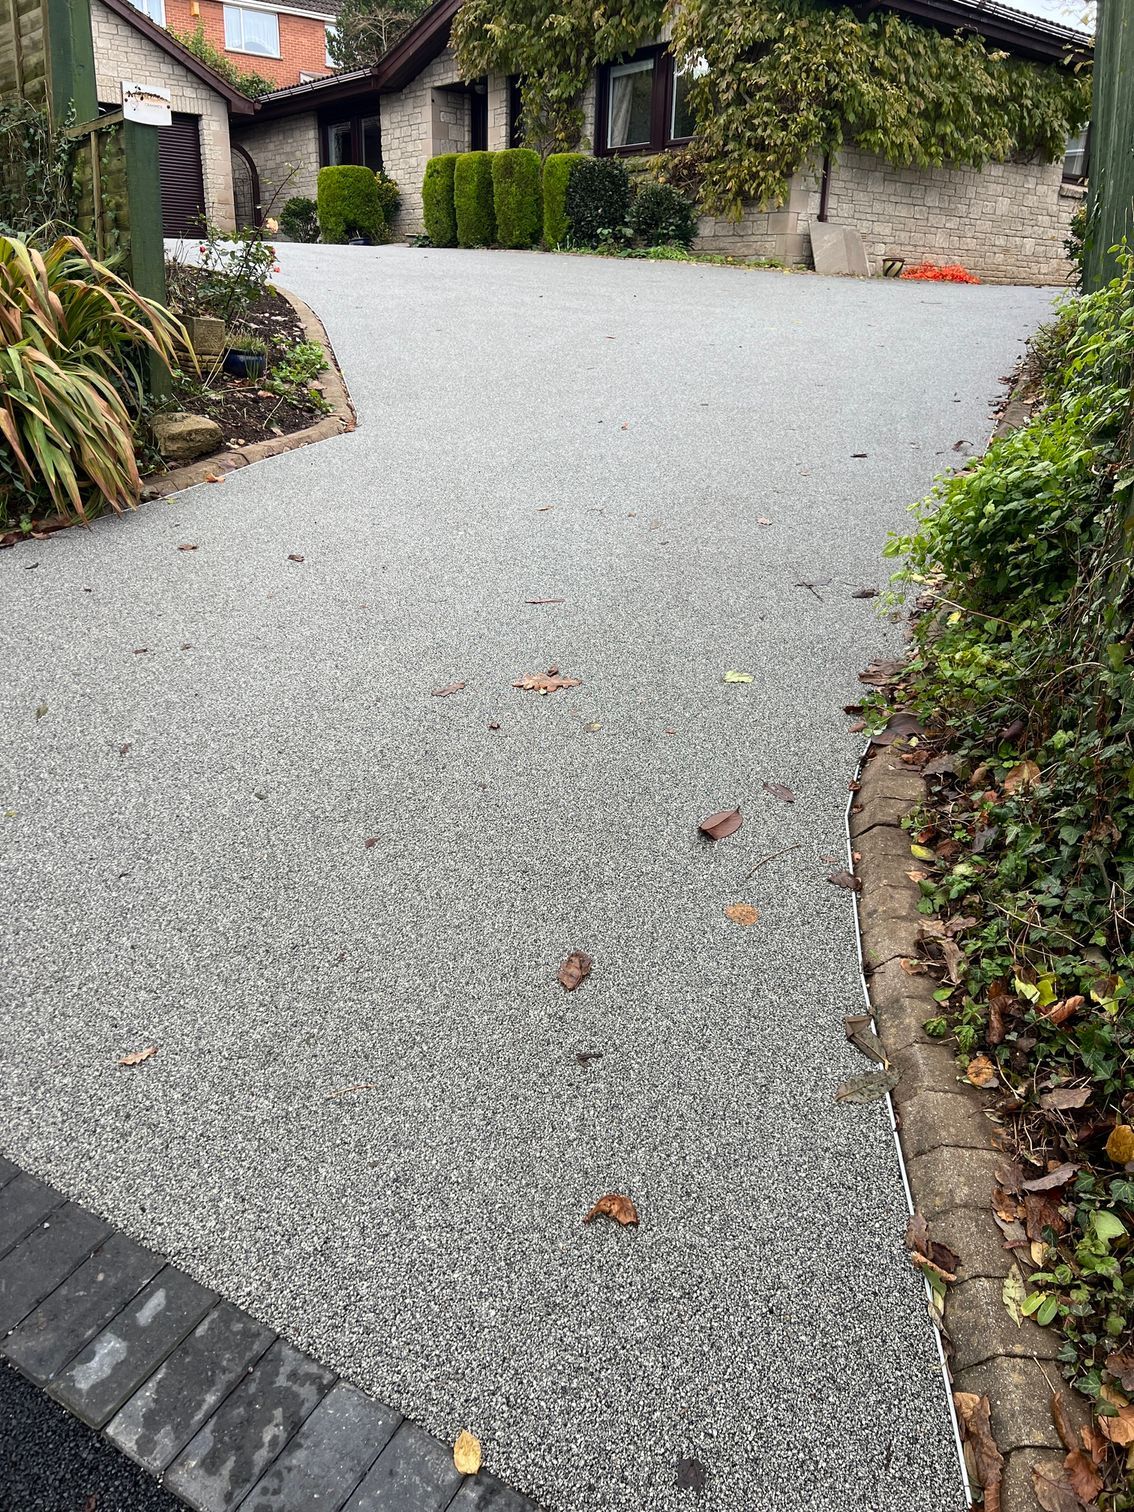 Newly installed grey resin driveway with brown leaves on it.